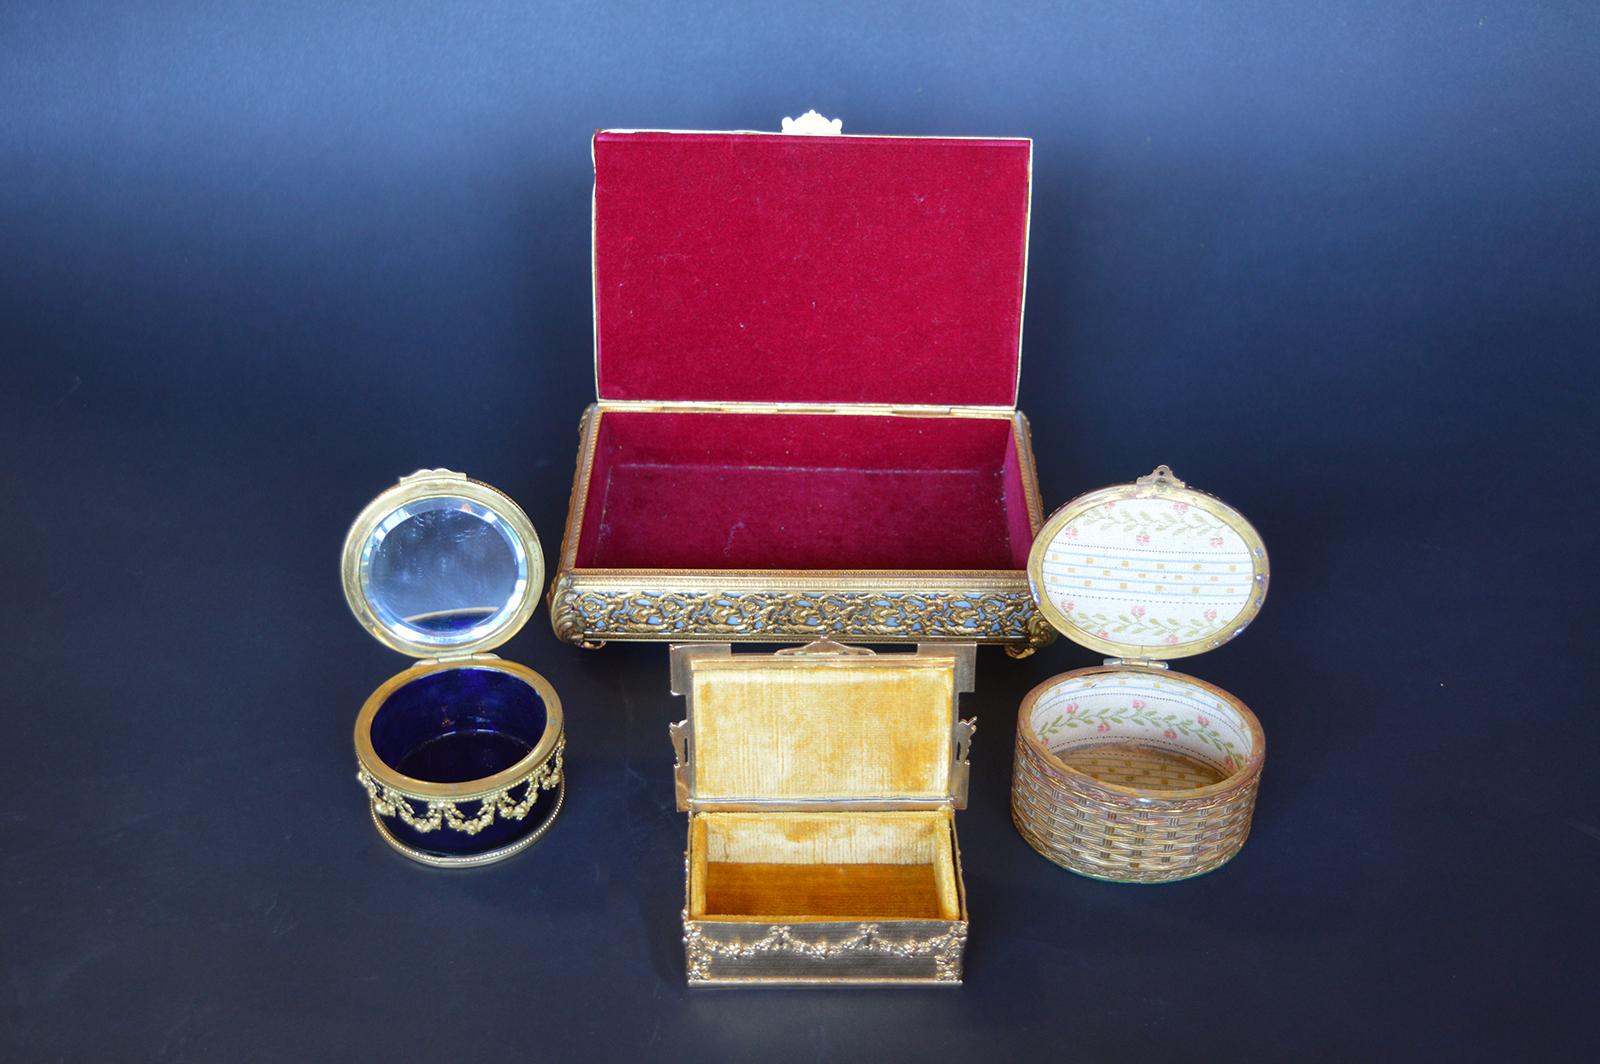 Collection of four boxes from France. Hand-painted. 19th century.
Measures: Oval box 2 inches H x 3.5 inches W x 3 inches D
Round box 2 inches H x 3 inches D
Small rectangle 1.5 inches x 4 inches W x 2.75 inches D.